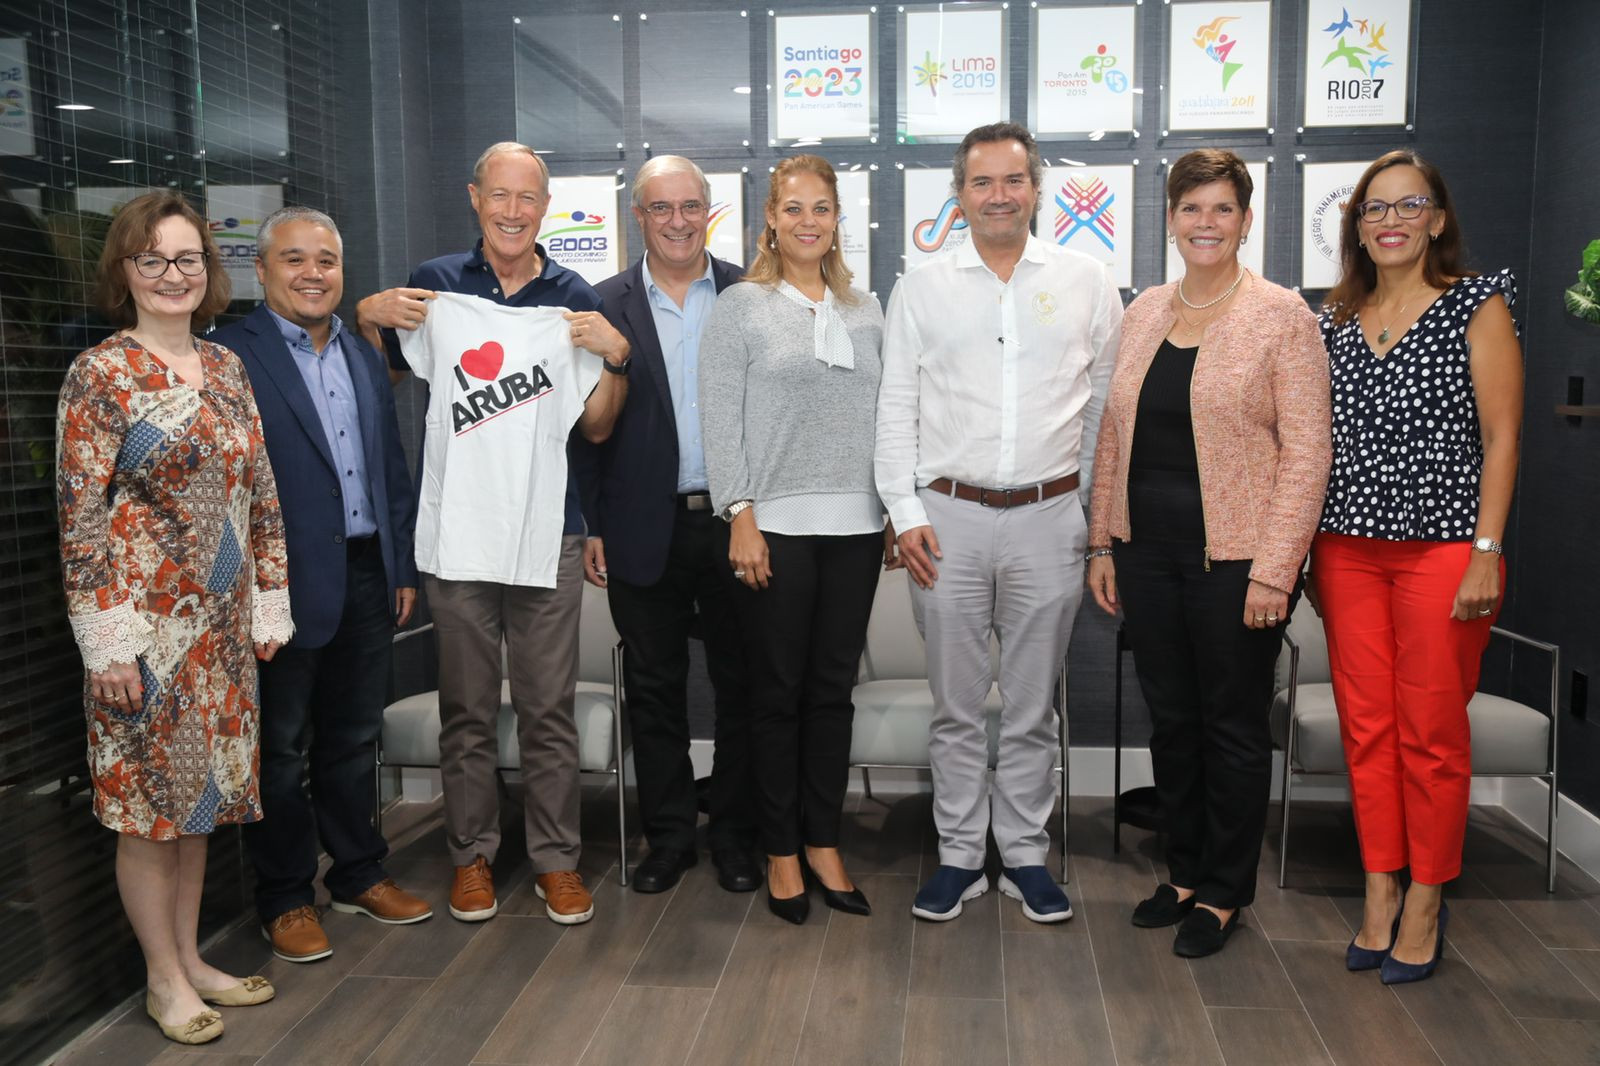 The meetings in Miami brought together officials in English and Spanish speaking groups ©Panam Sports